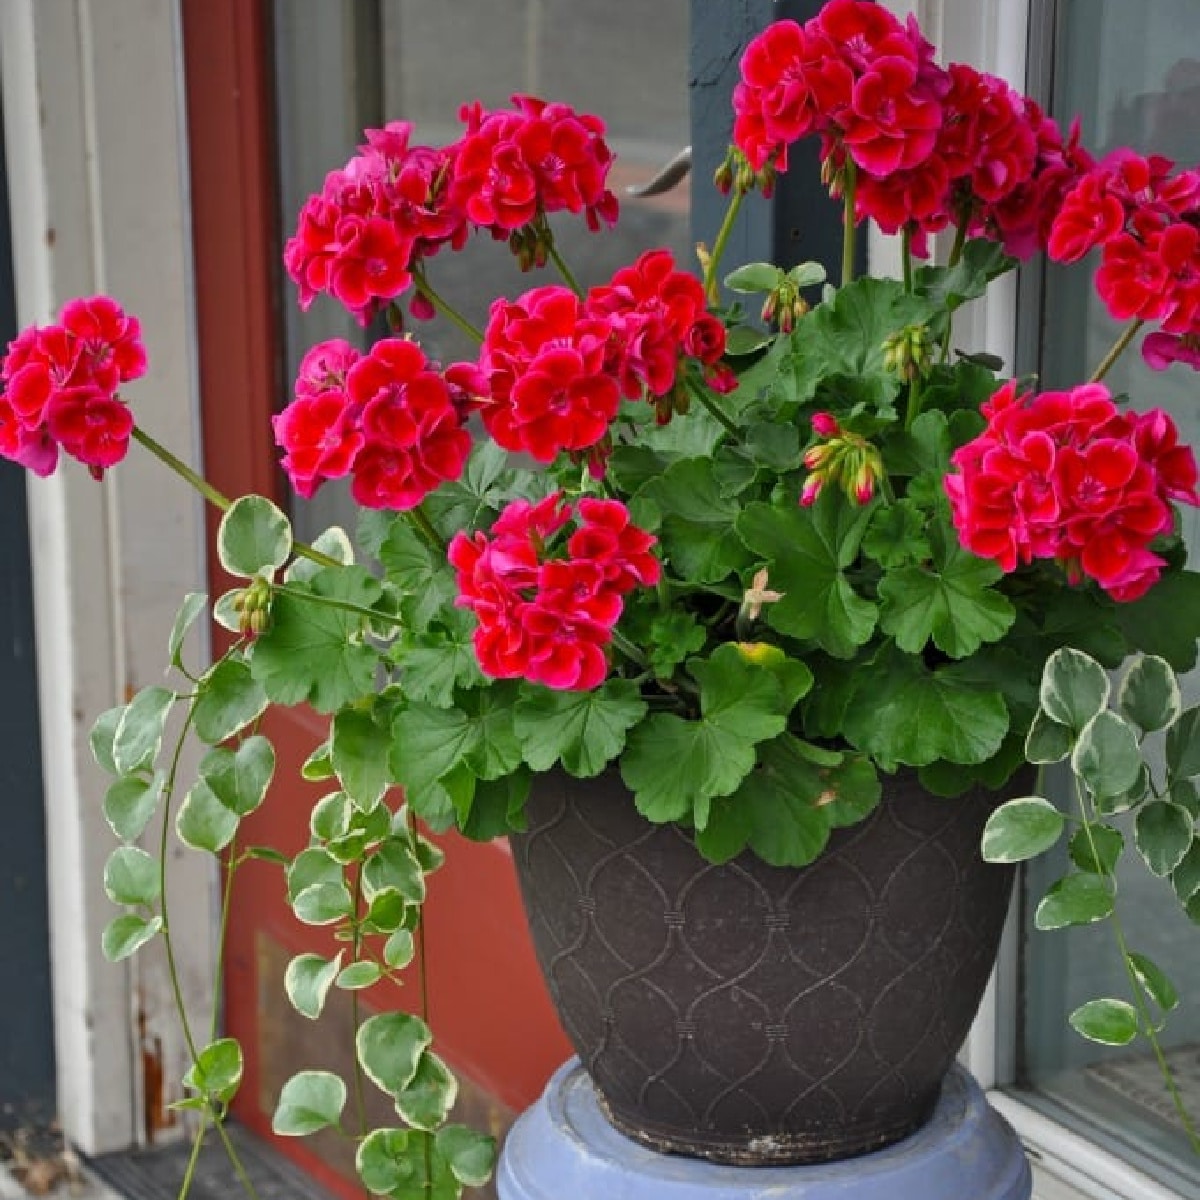 Geraniums and ivy in a pot.